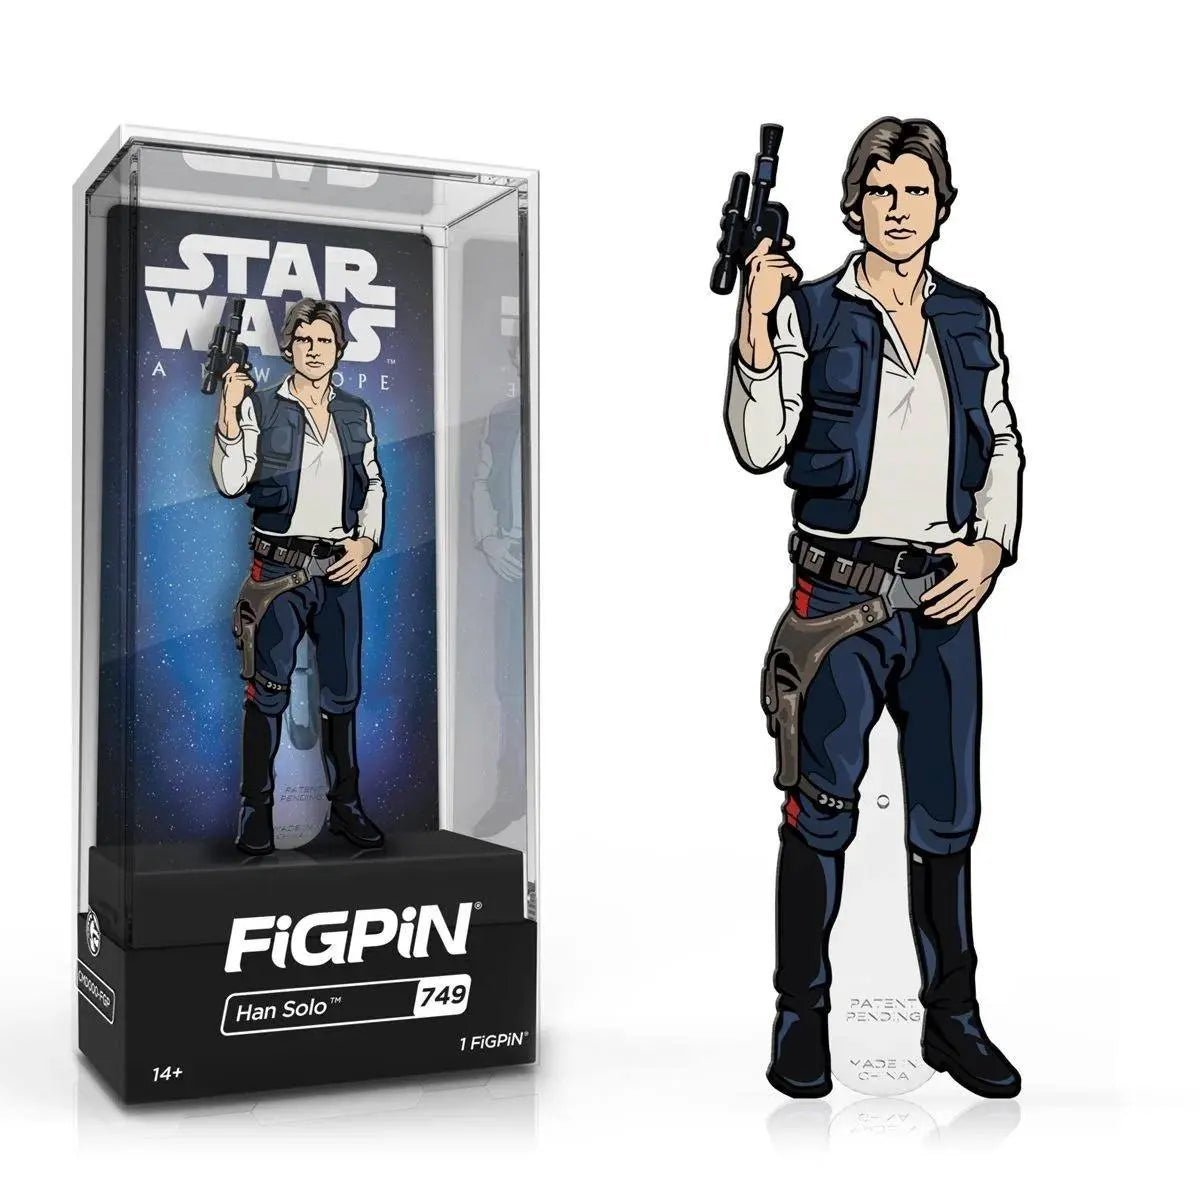 Star Wars: A New Hope Han Solo FiGPiN 3-Inch Enamel Pin #749 - Simon's Collectibles